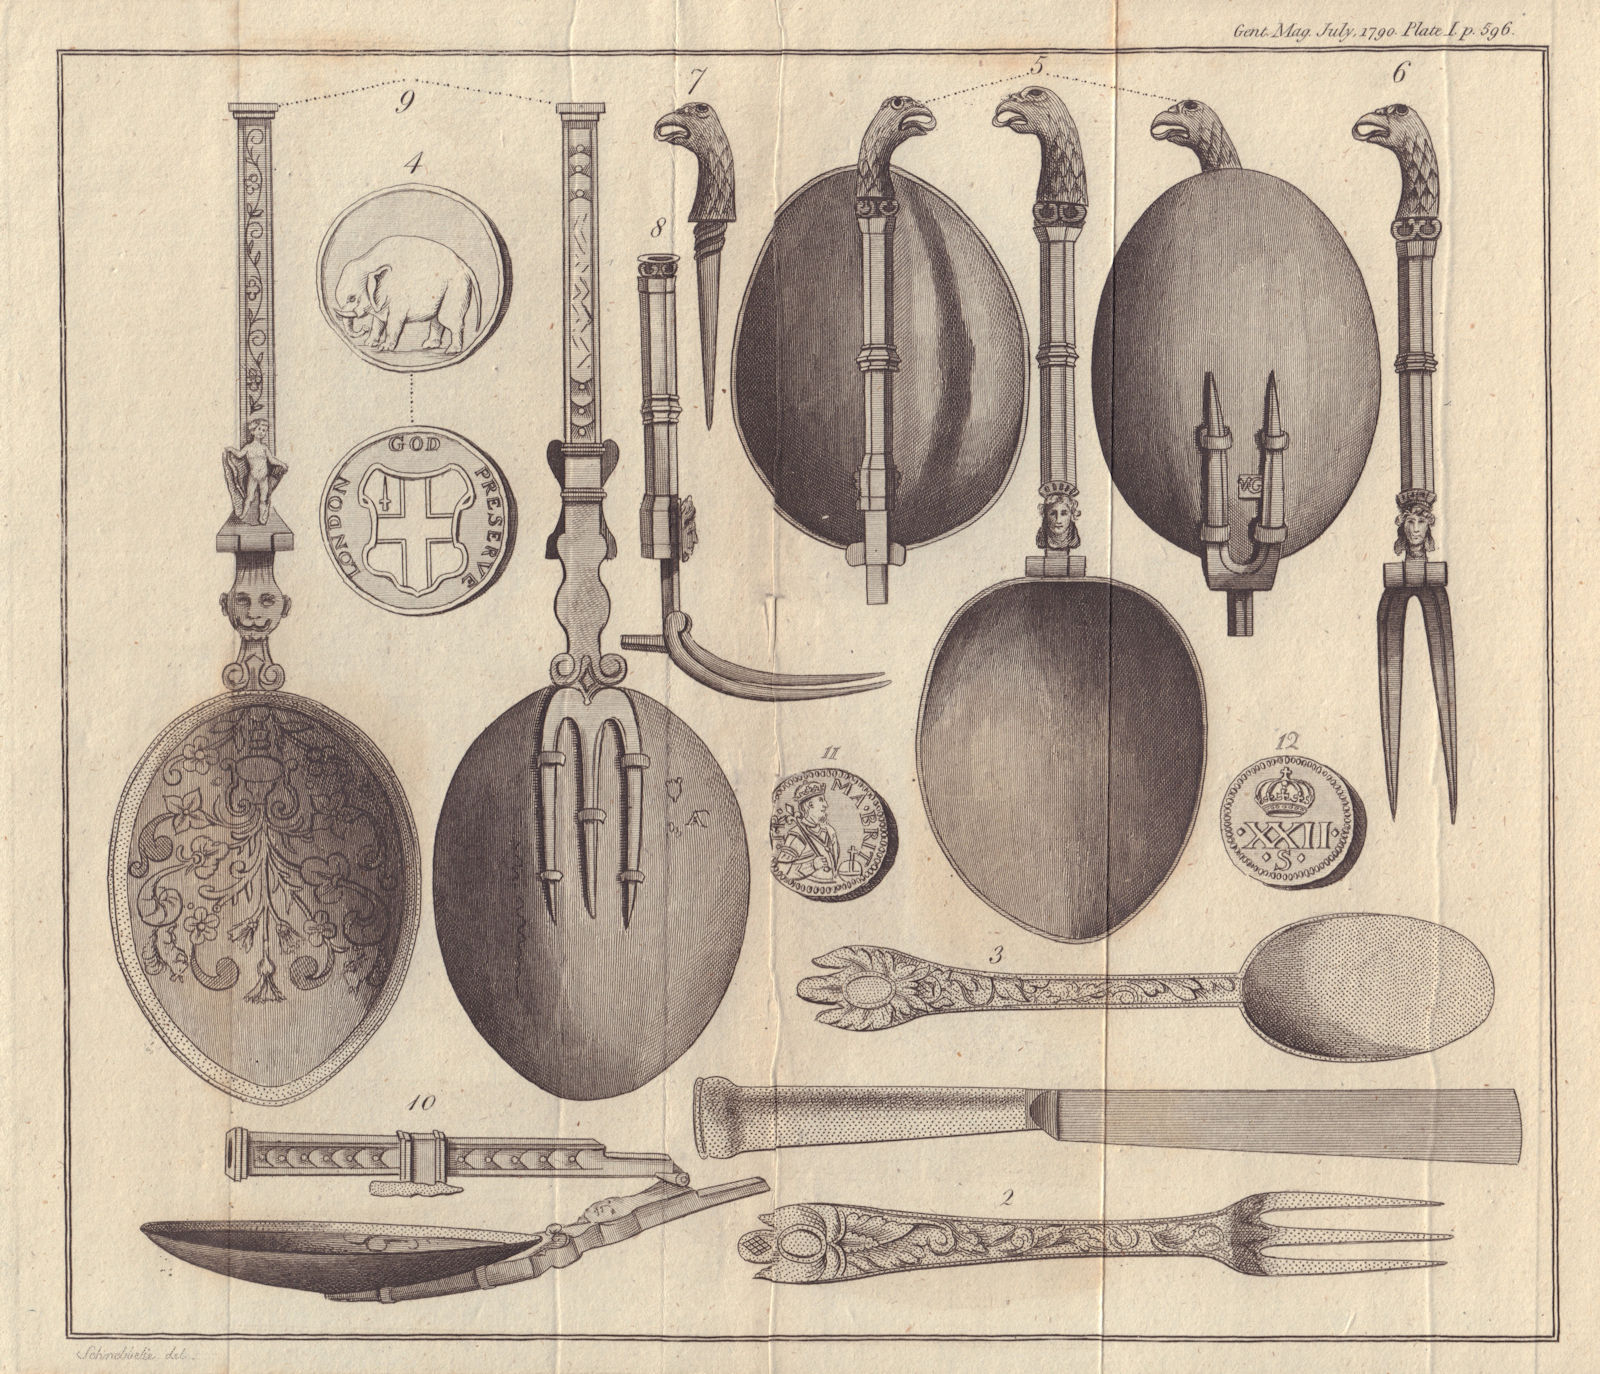 Antique Cutlery Enfield Palace. Loon Halfpenny. GENTS MAG 1790 old print